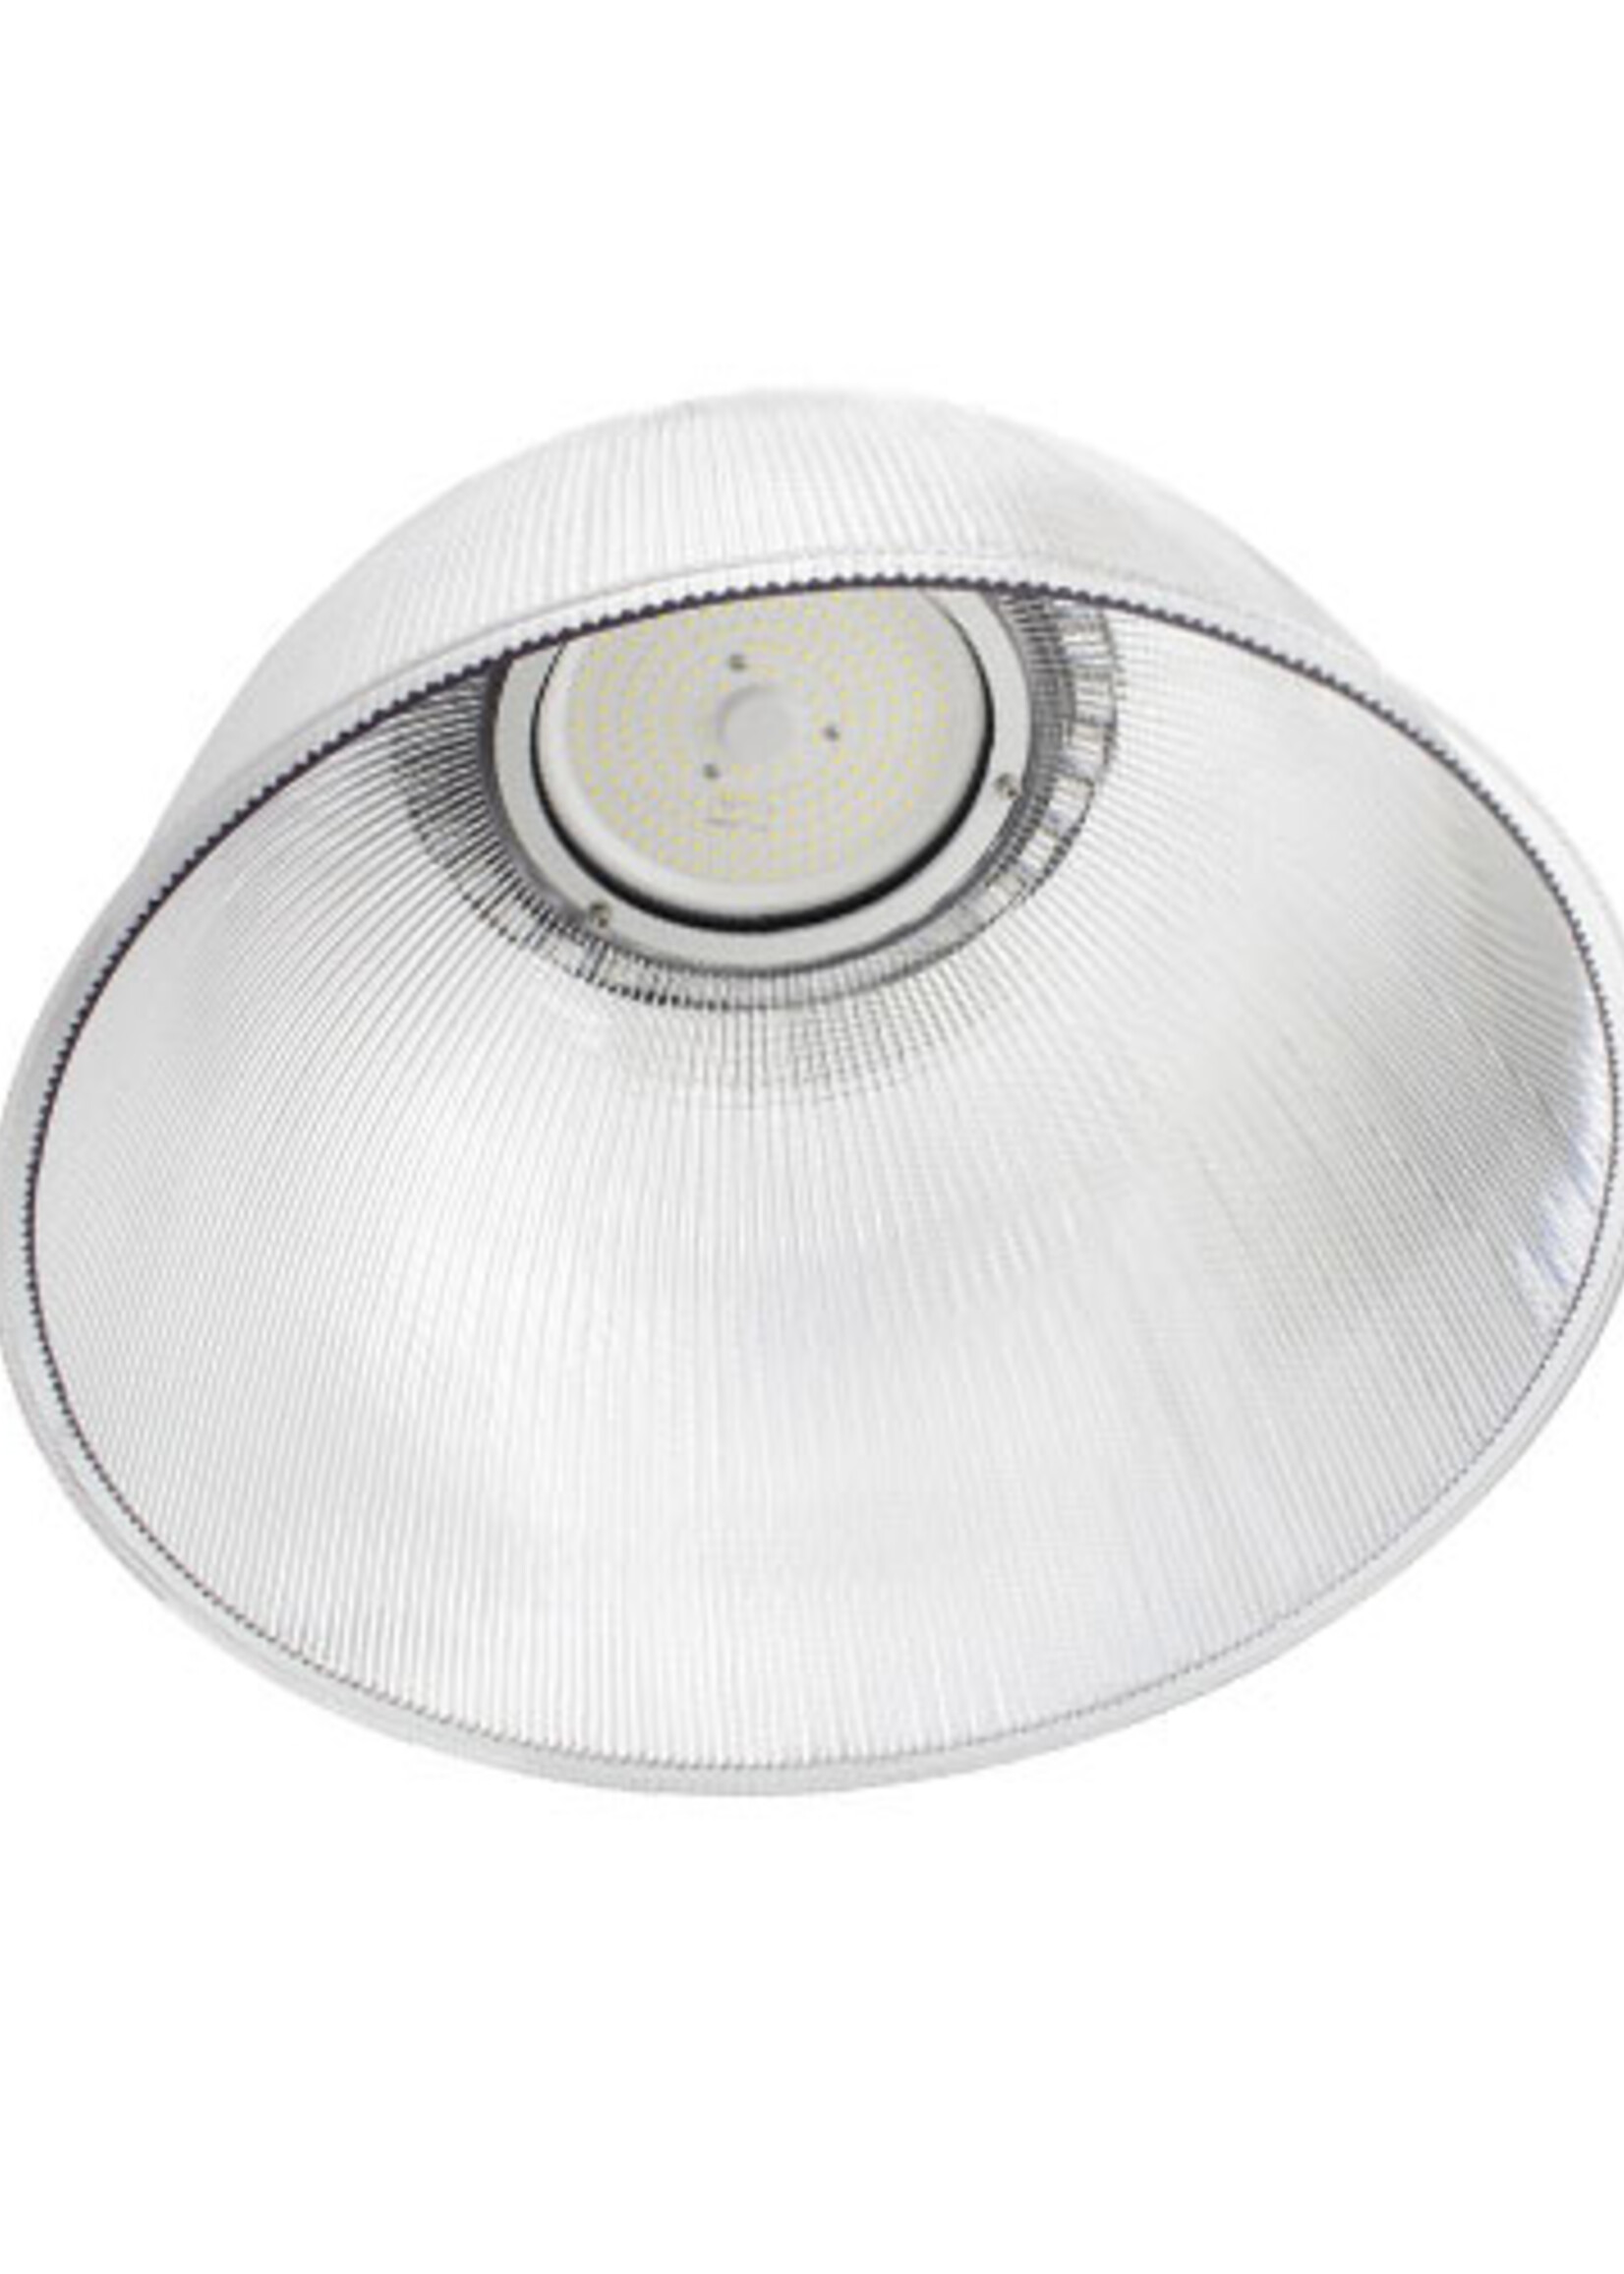 Philips Xitanium LED Driver 150W LED UFO Highbay IP65 150lm/W Philips dimmable driver